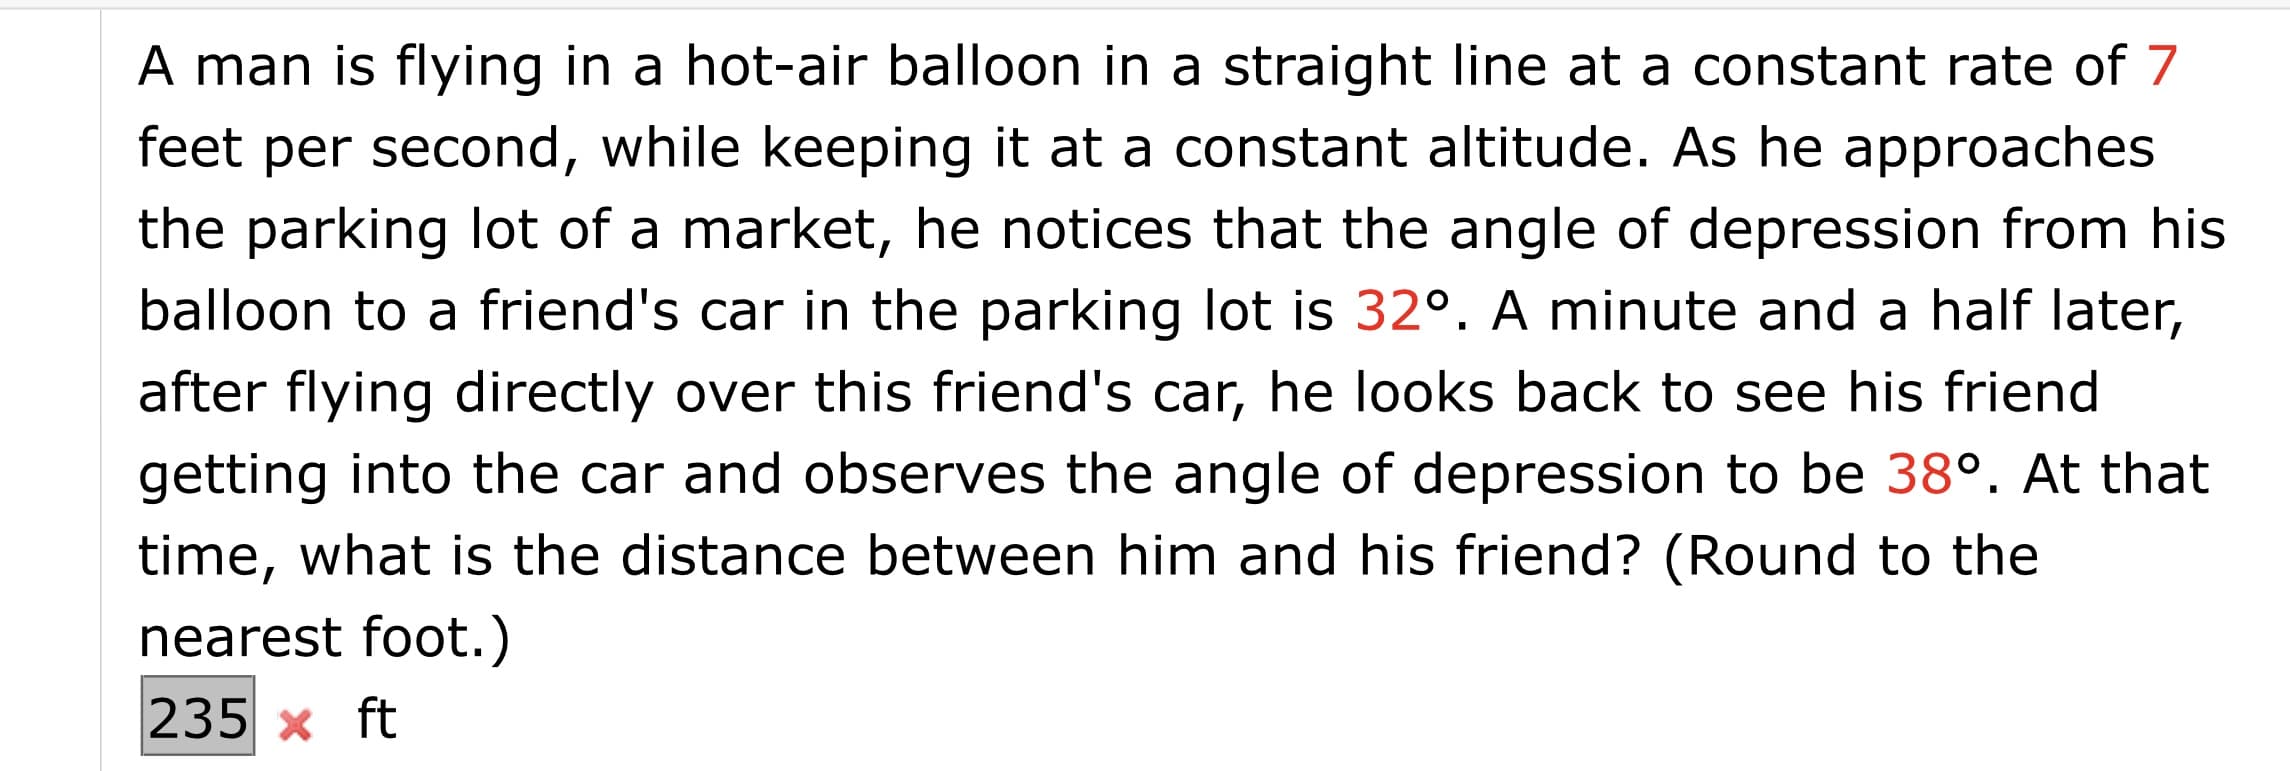 A man is flying in a hot-air balloon in a straight line at a constant rate of 7
feet per second, while keeping it at a constant altitude. As he approaches
the parking lot of a market, he notices that the angle of depression from his
balloon to a friend's car in the parking lot is 32°. A minute and a half later,
after flying directly over this friend's car, he looks back to see his friend
getting into the car and observes the angle of depression to be 38°. At that
time, what is the distance between him and his friend? (Round to the
nearest foot.)
235 x ft
